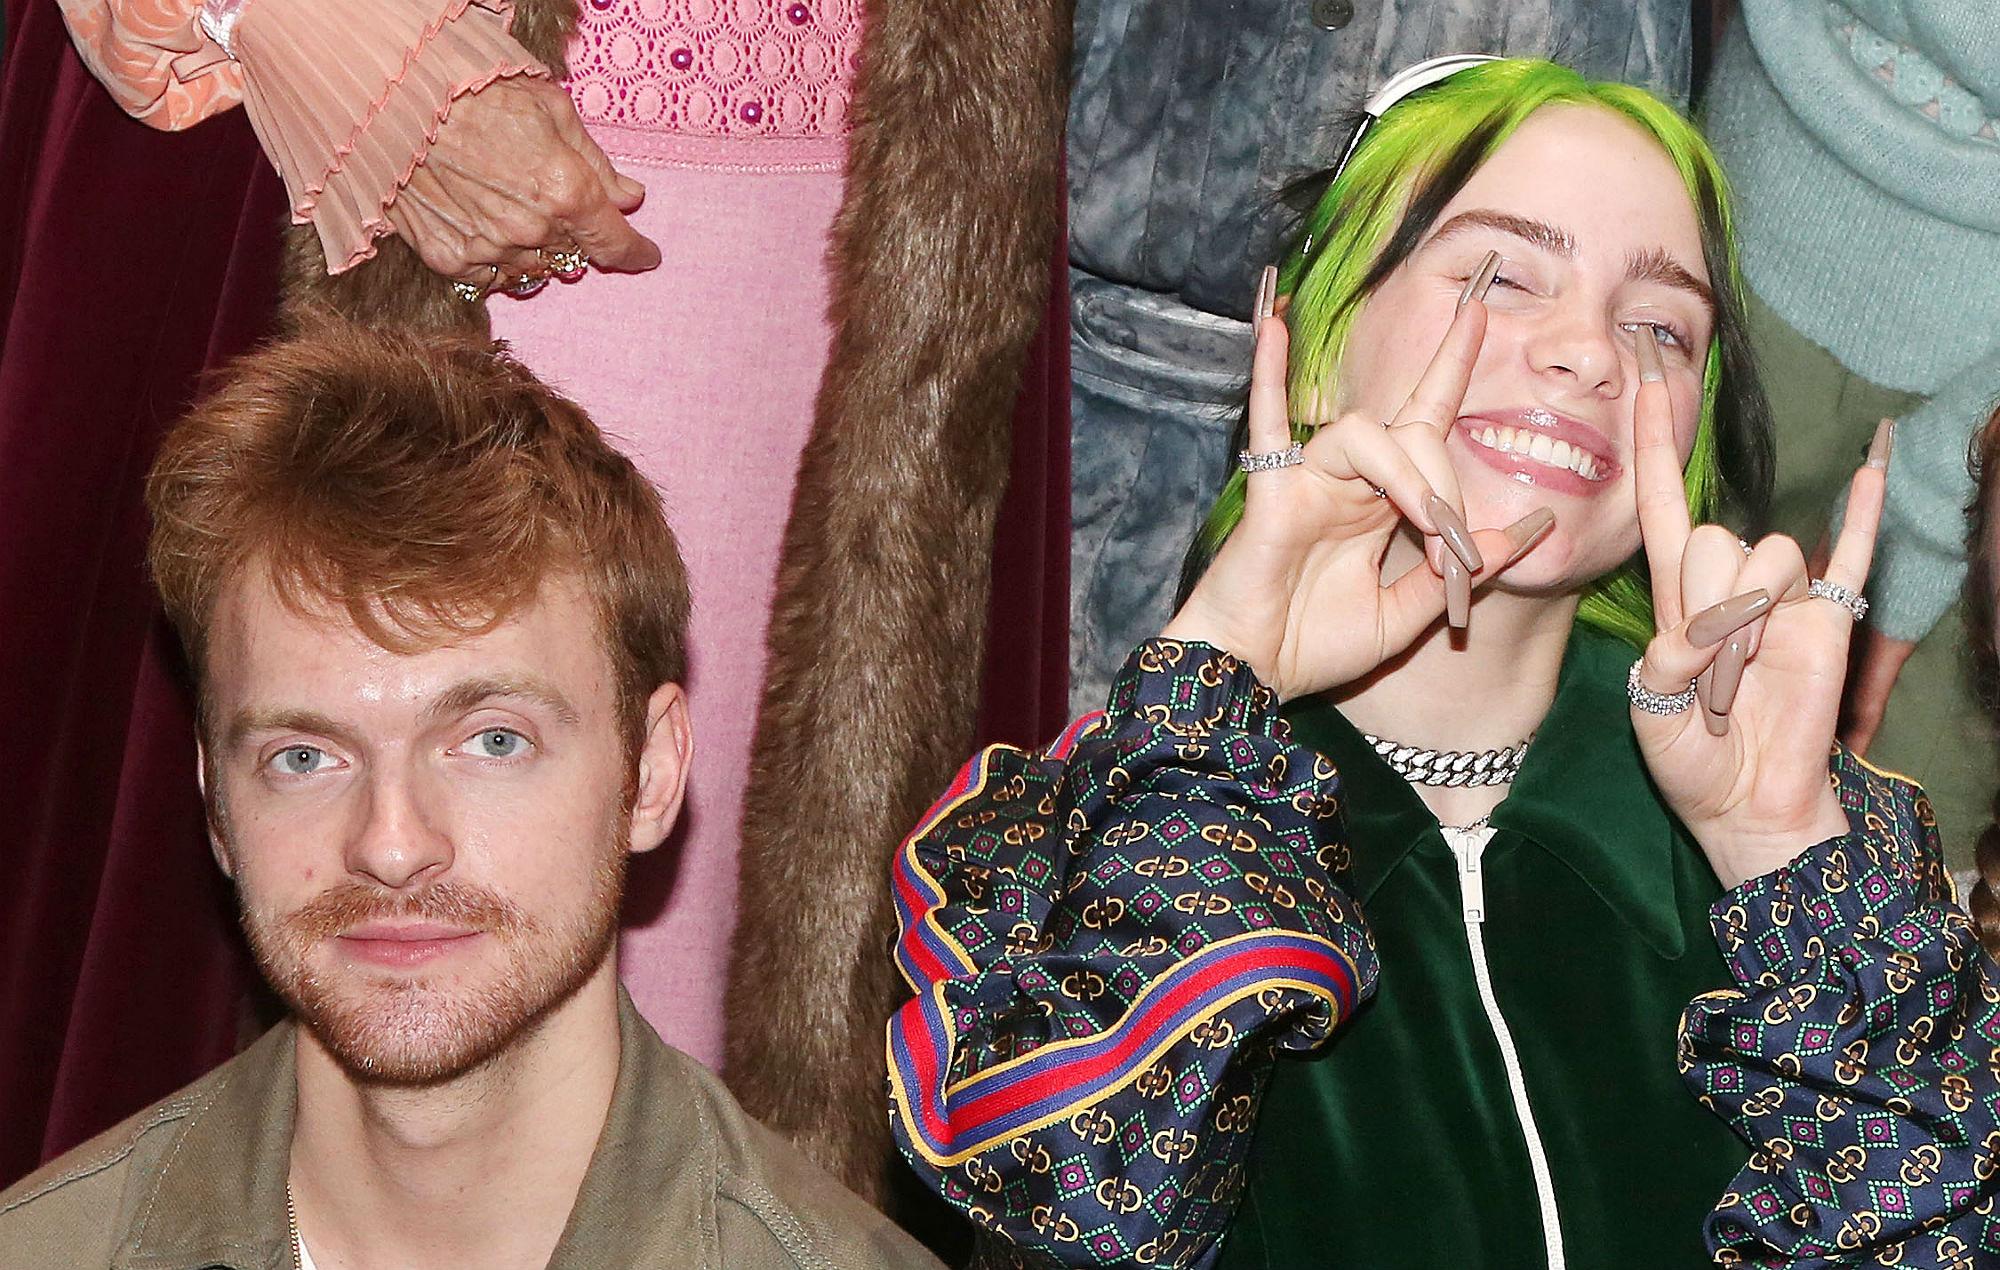 Billie Eilish's brother and producer Finneas on why he